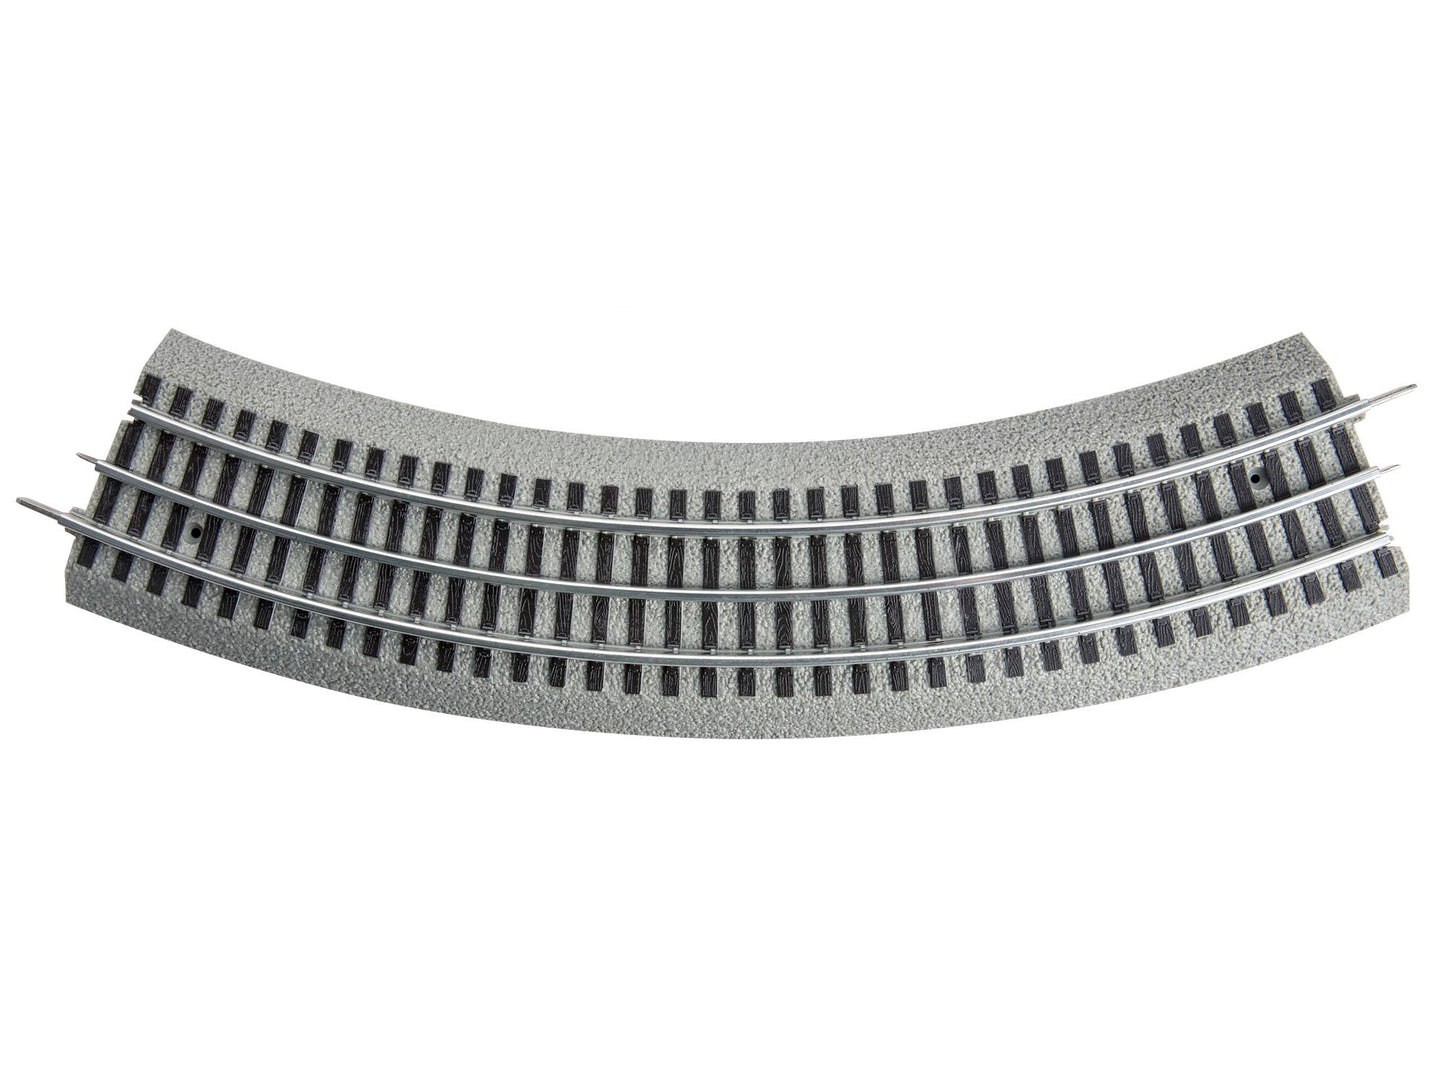 Lionel FasTrack 036 Curved Track